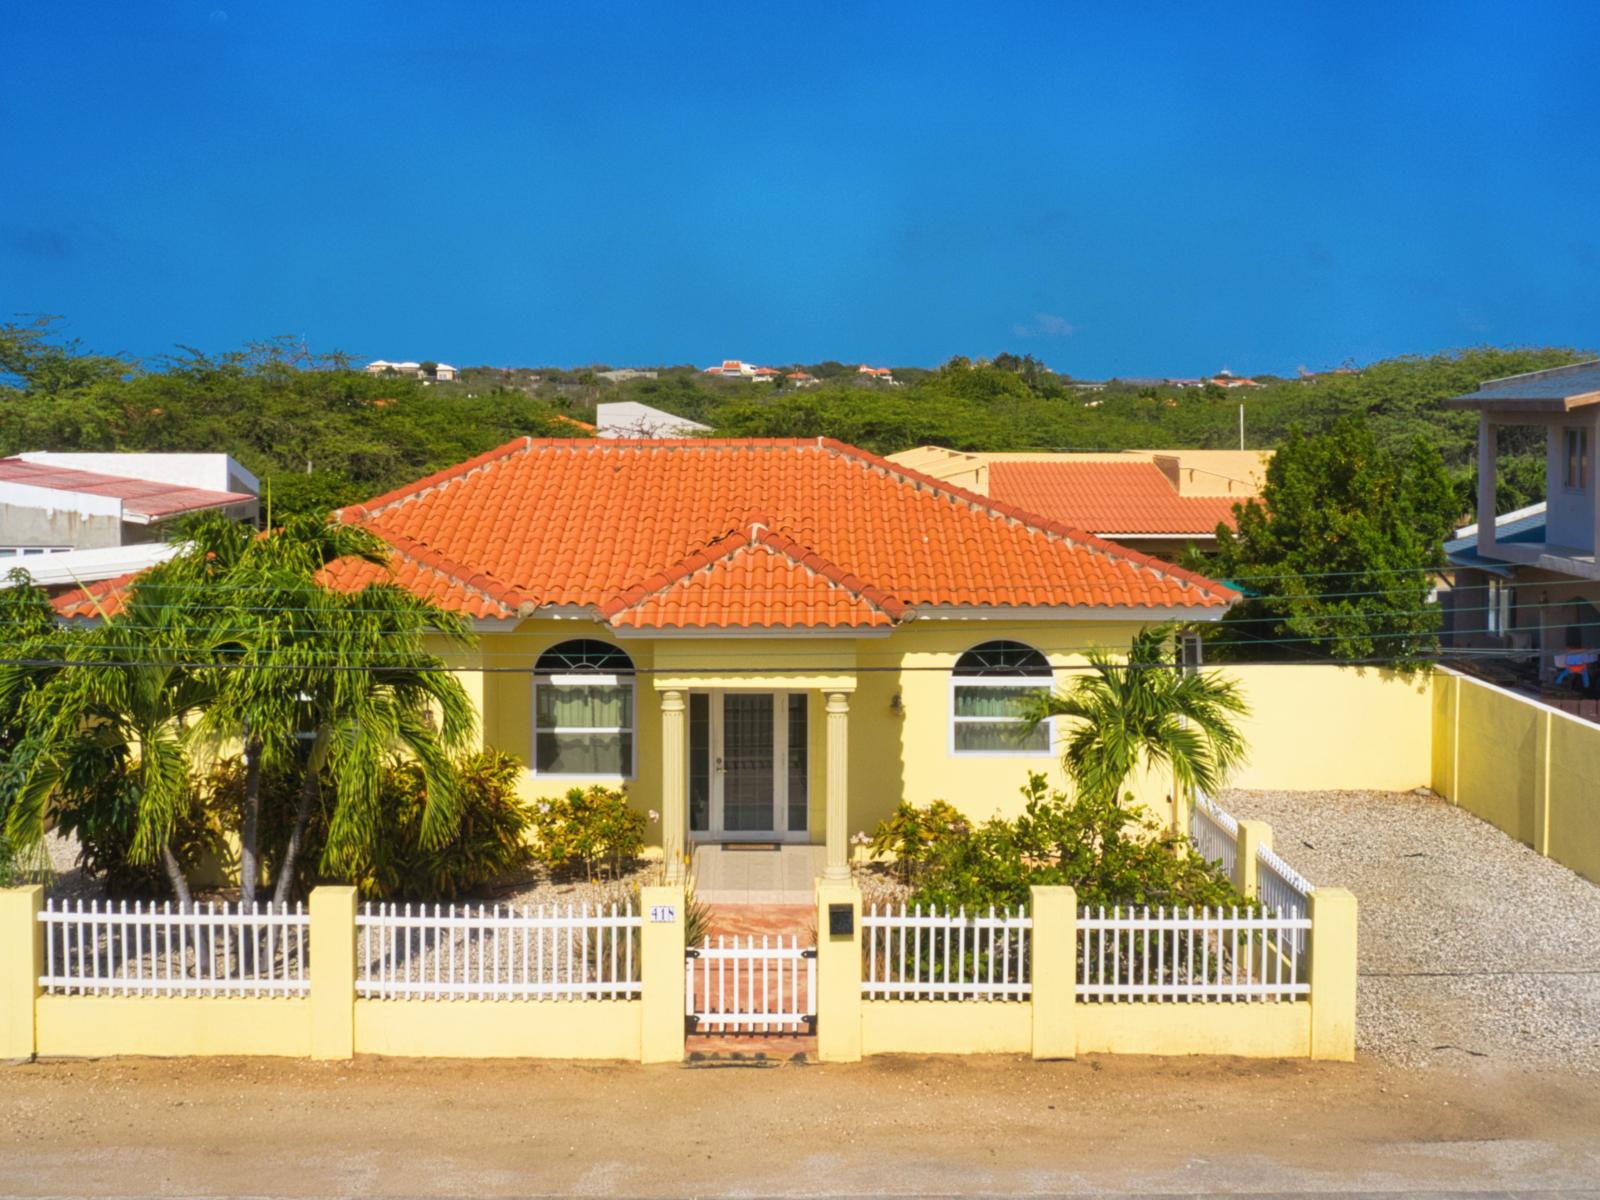 Discover the epitome of curb appeal with our picturesque front facade in Noord Aruba - Step into a world of comfort and hospitality as you approach welcoming home - Start your getaway off right with the charming allure of front entrance